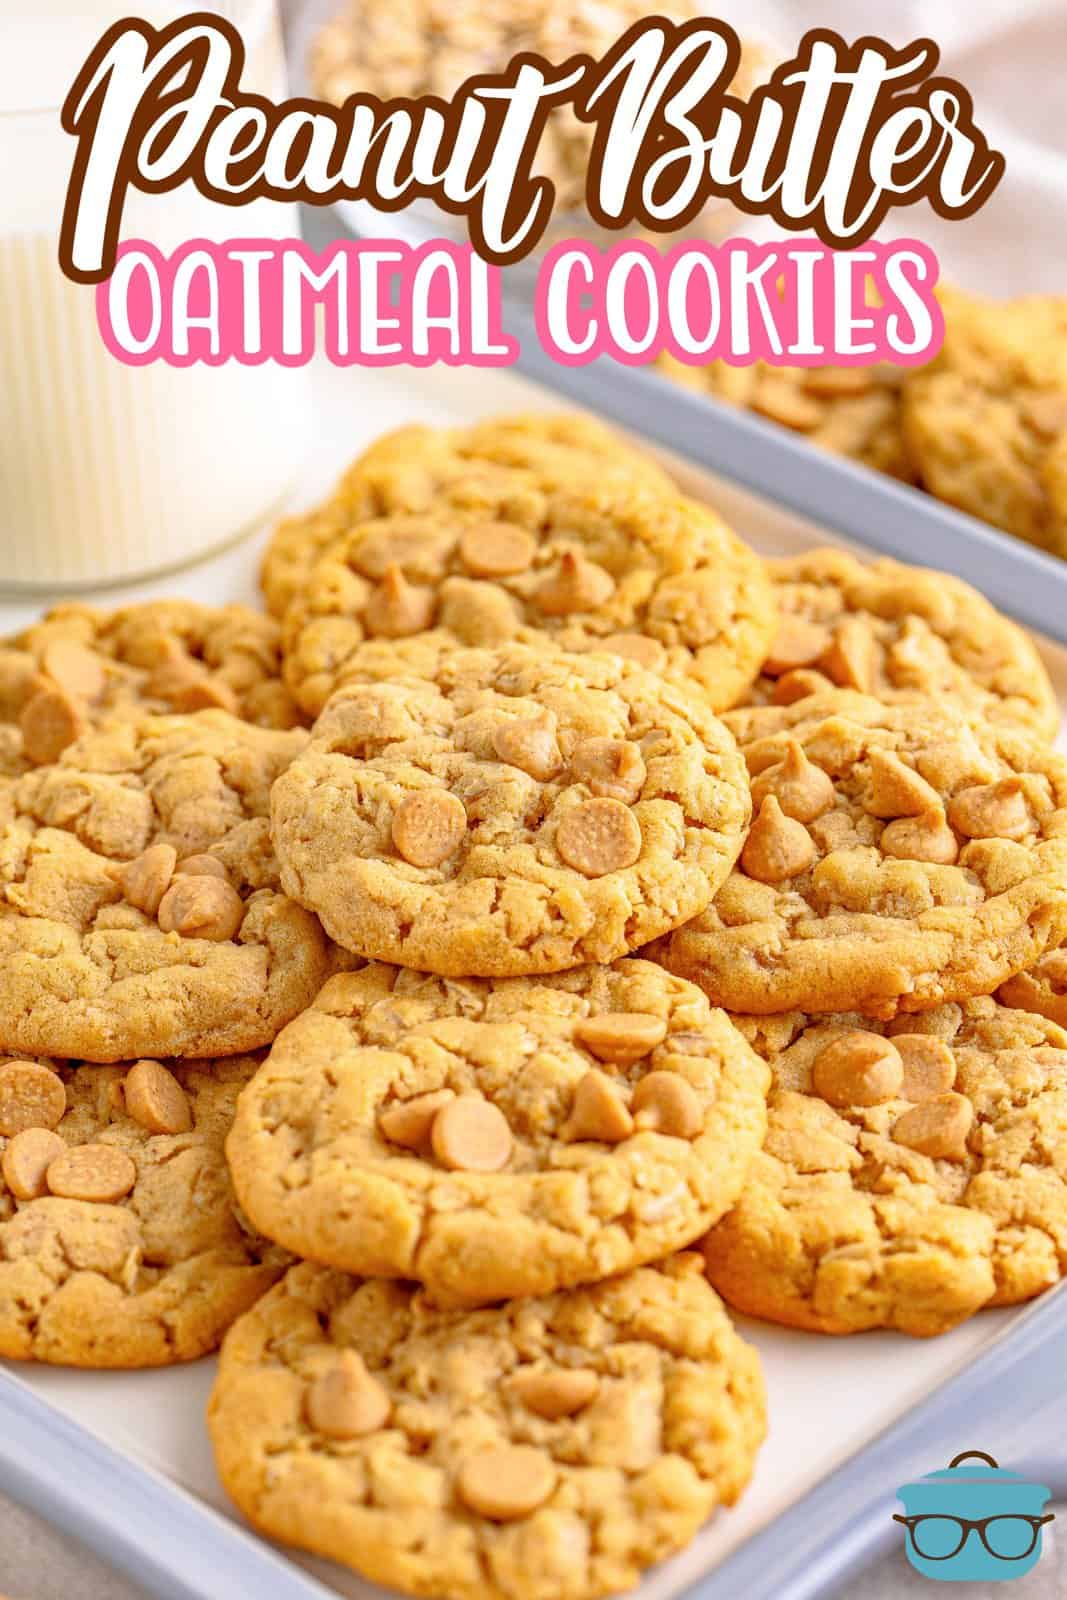 Pinterest image of Peanut Butter Oatmeal Cookies layered on baking sheet.